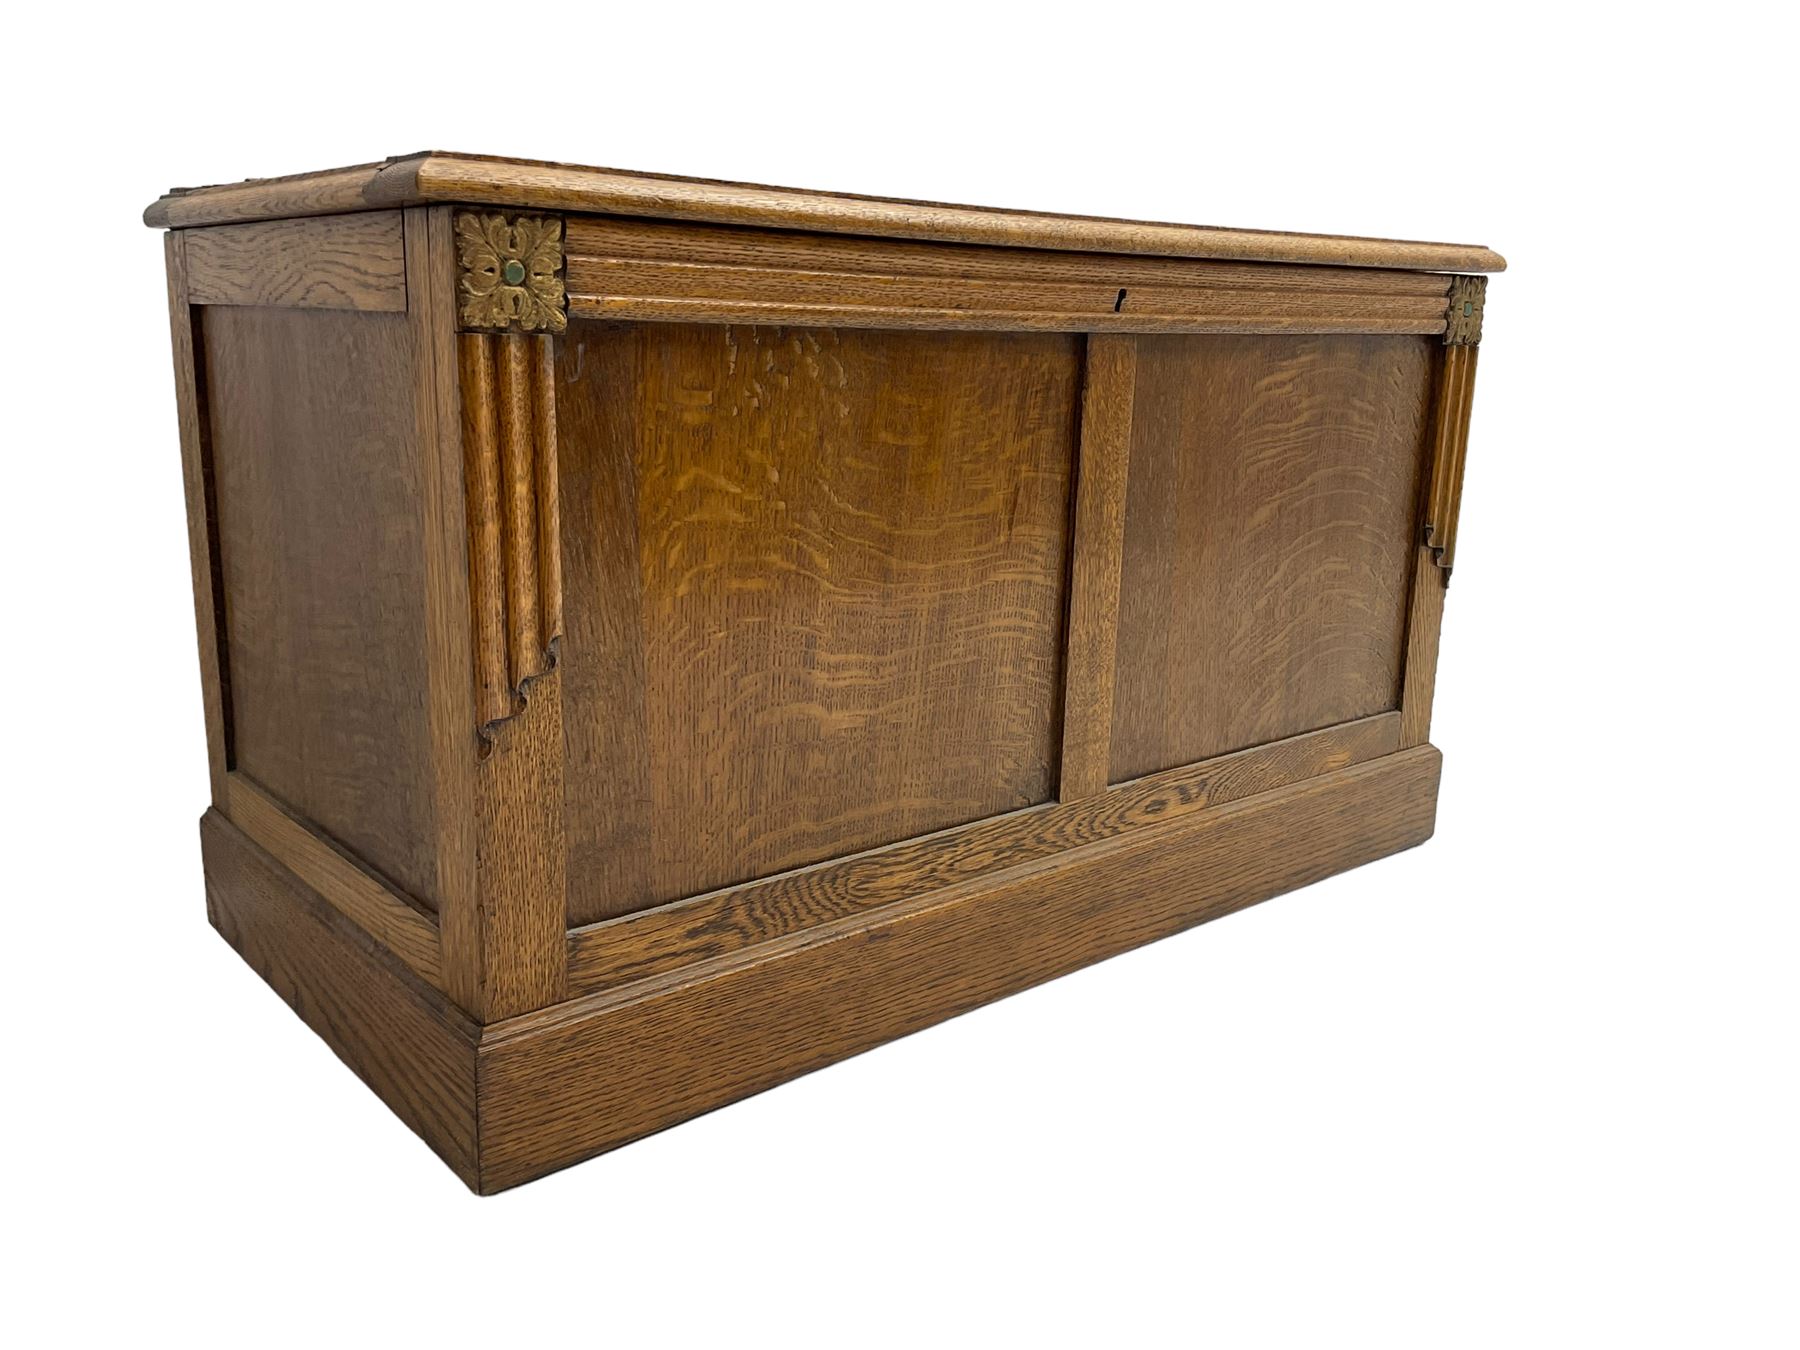 Arts and Crafts oak panelled chest or coffer - Image 3 of 7